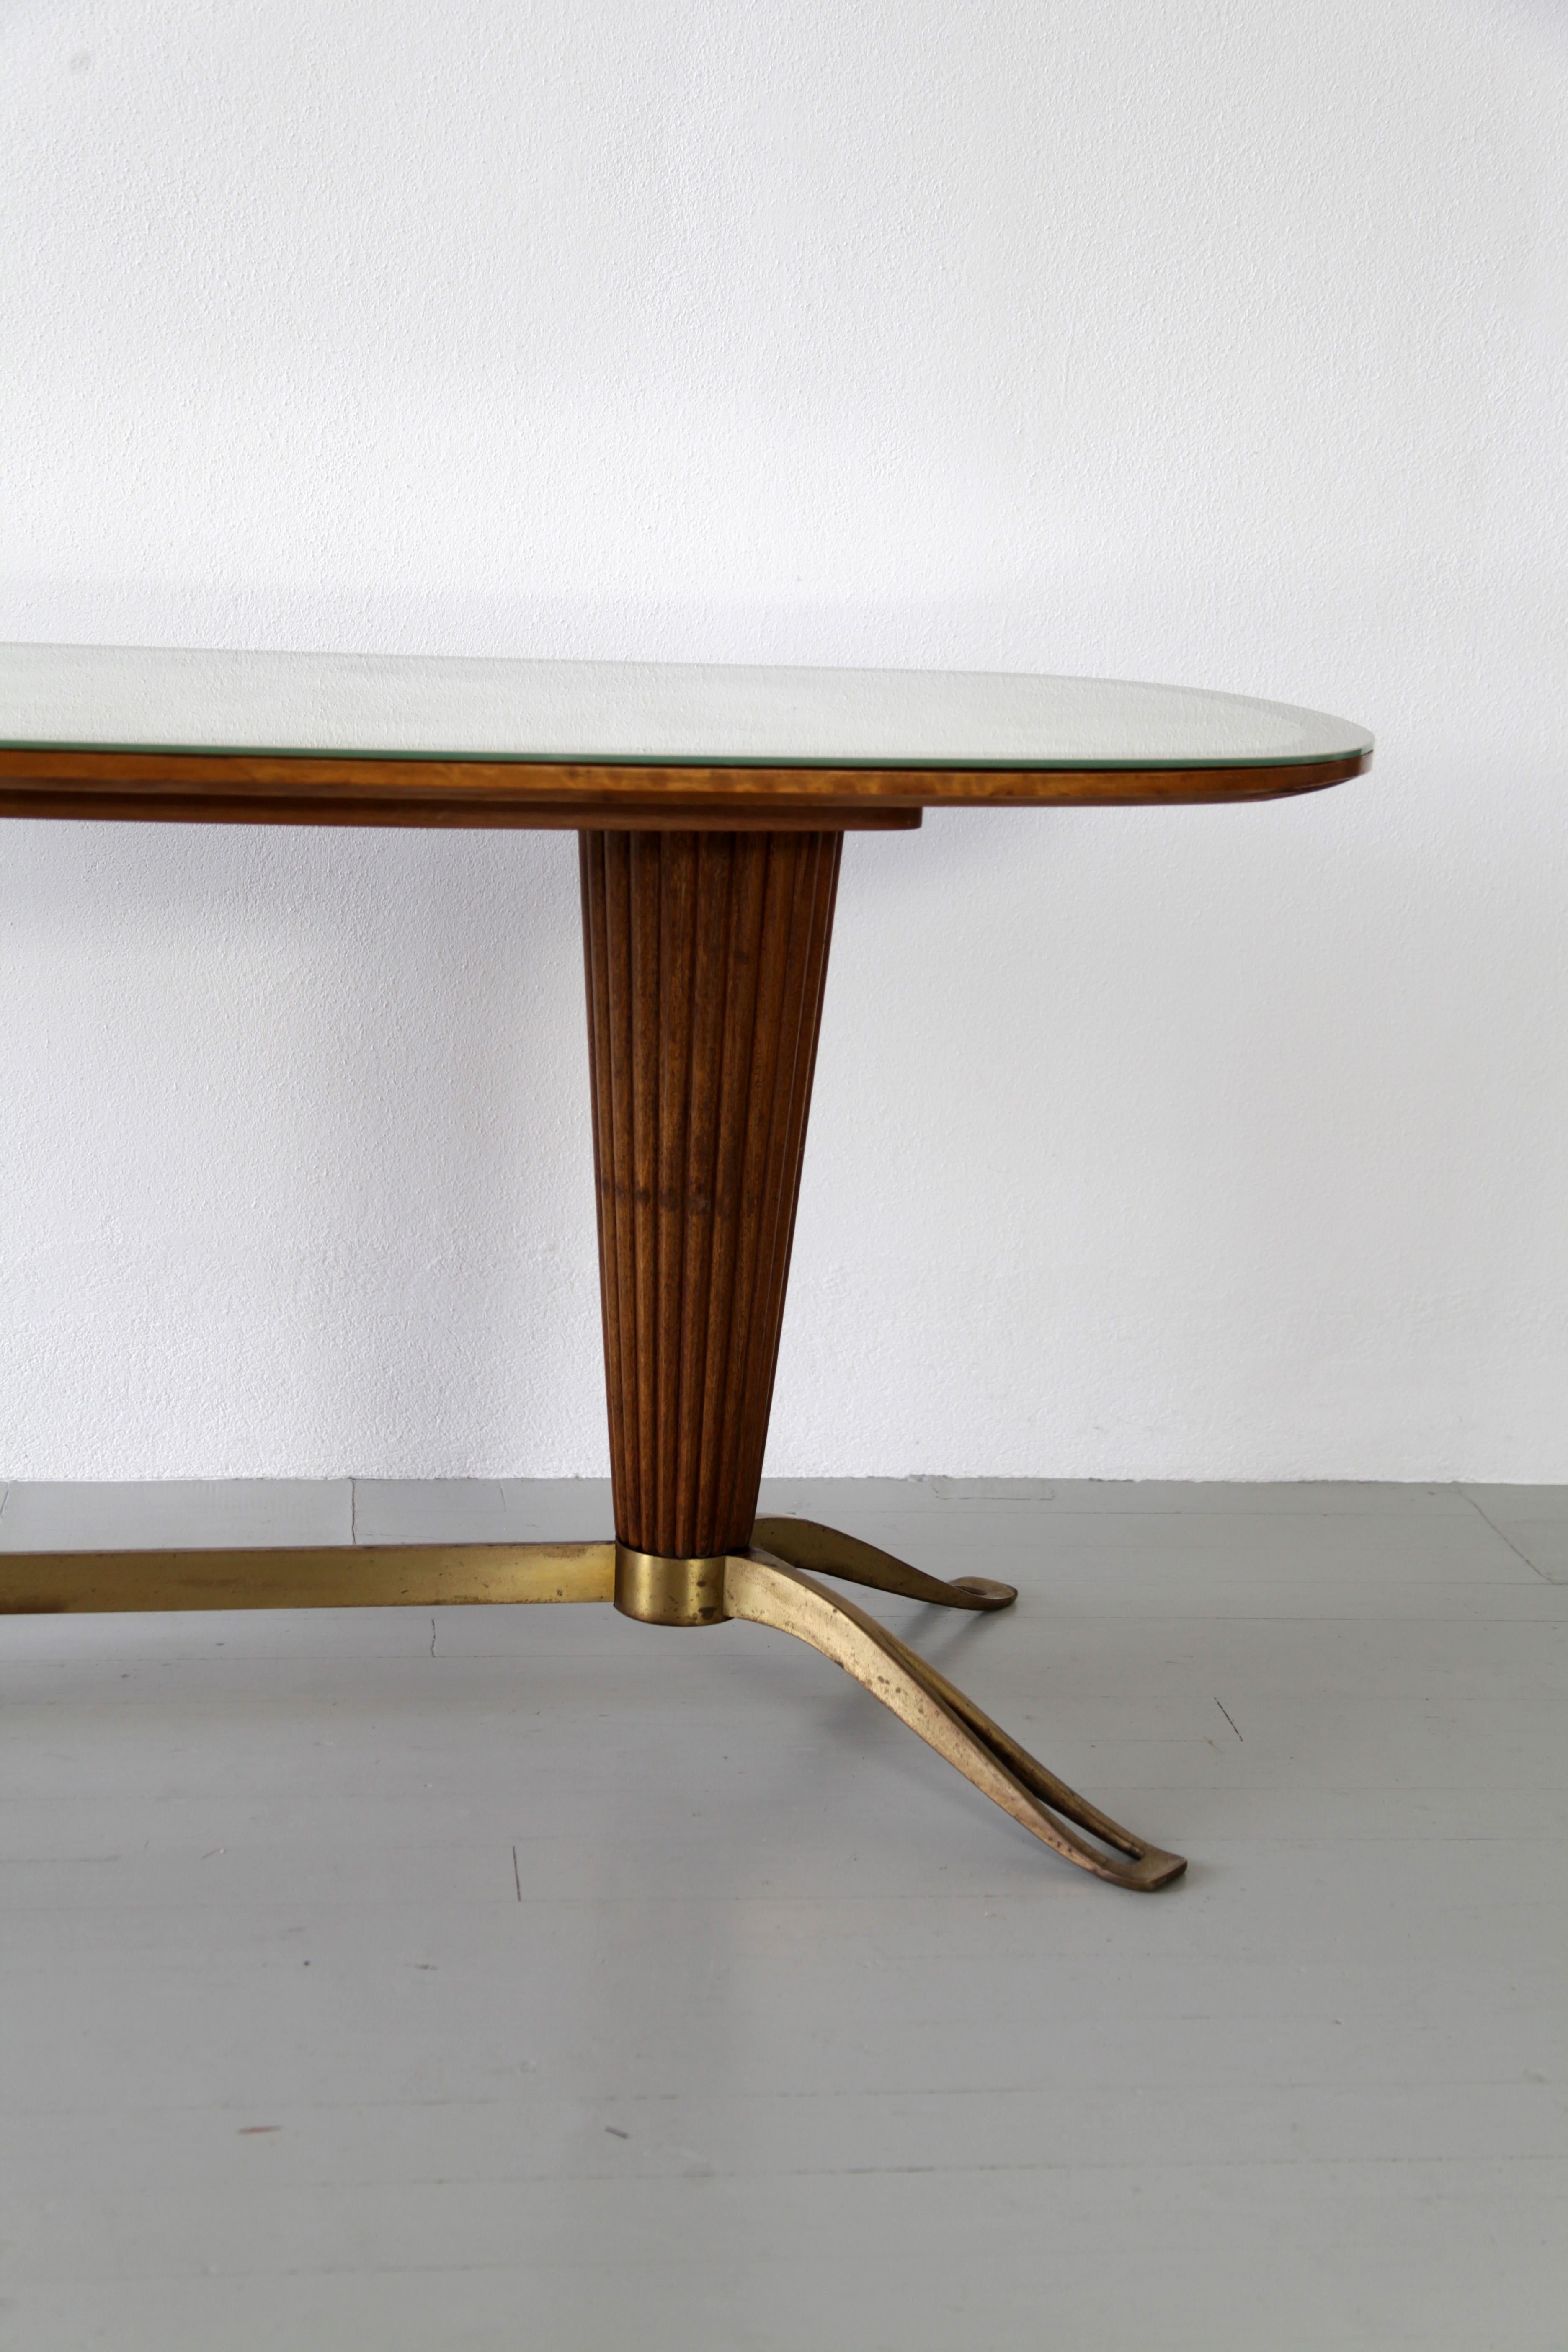 Table with tapered column base within the frame brass, walnut and glass are used. Interestingly this design features a zonal separation of materials, on brass follows wood and on wood follows glass.

Feel free to contact us for more detailed